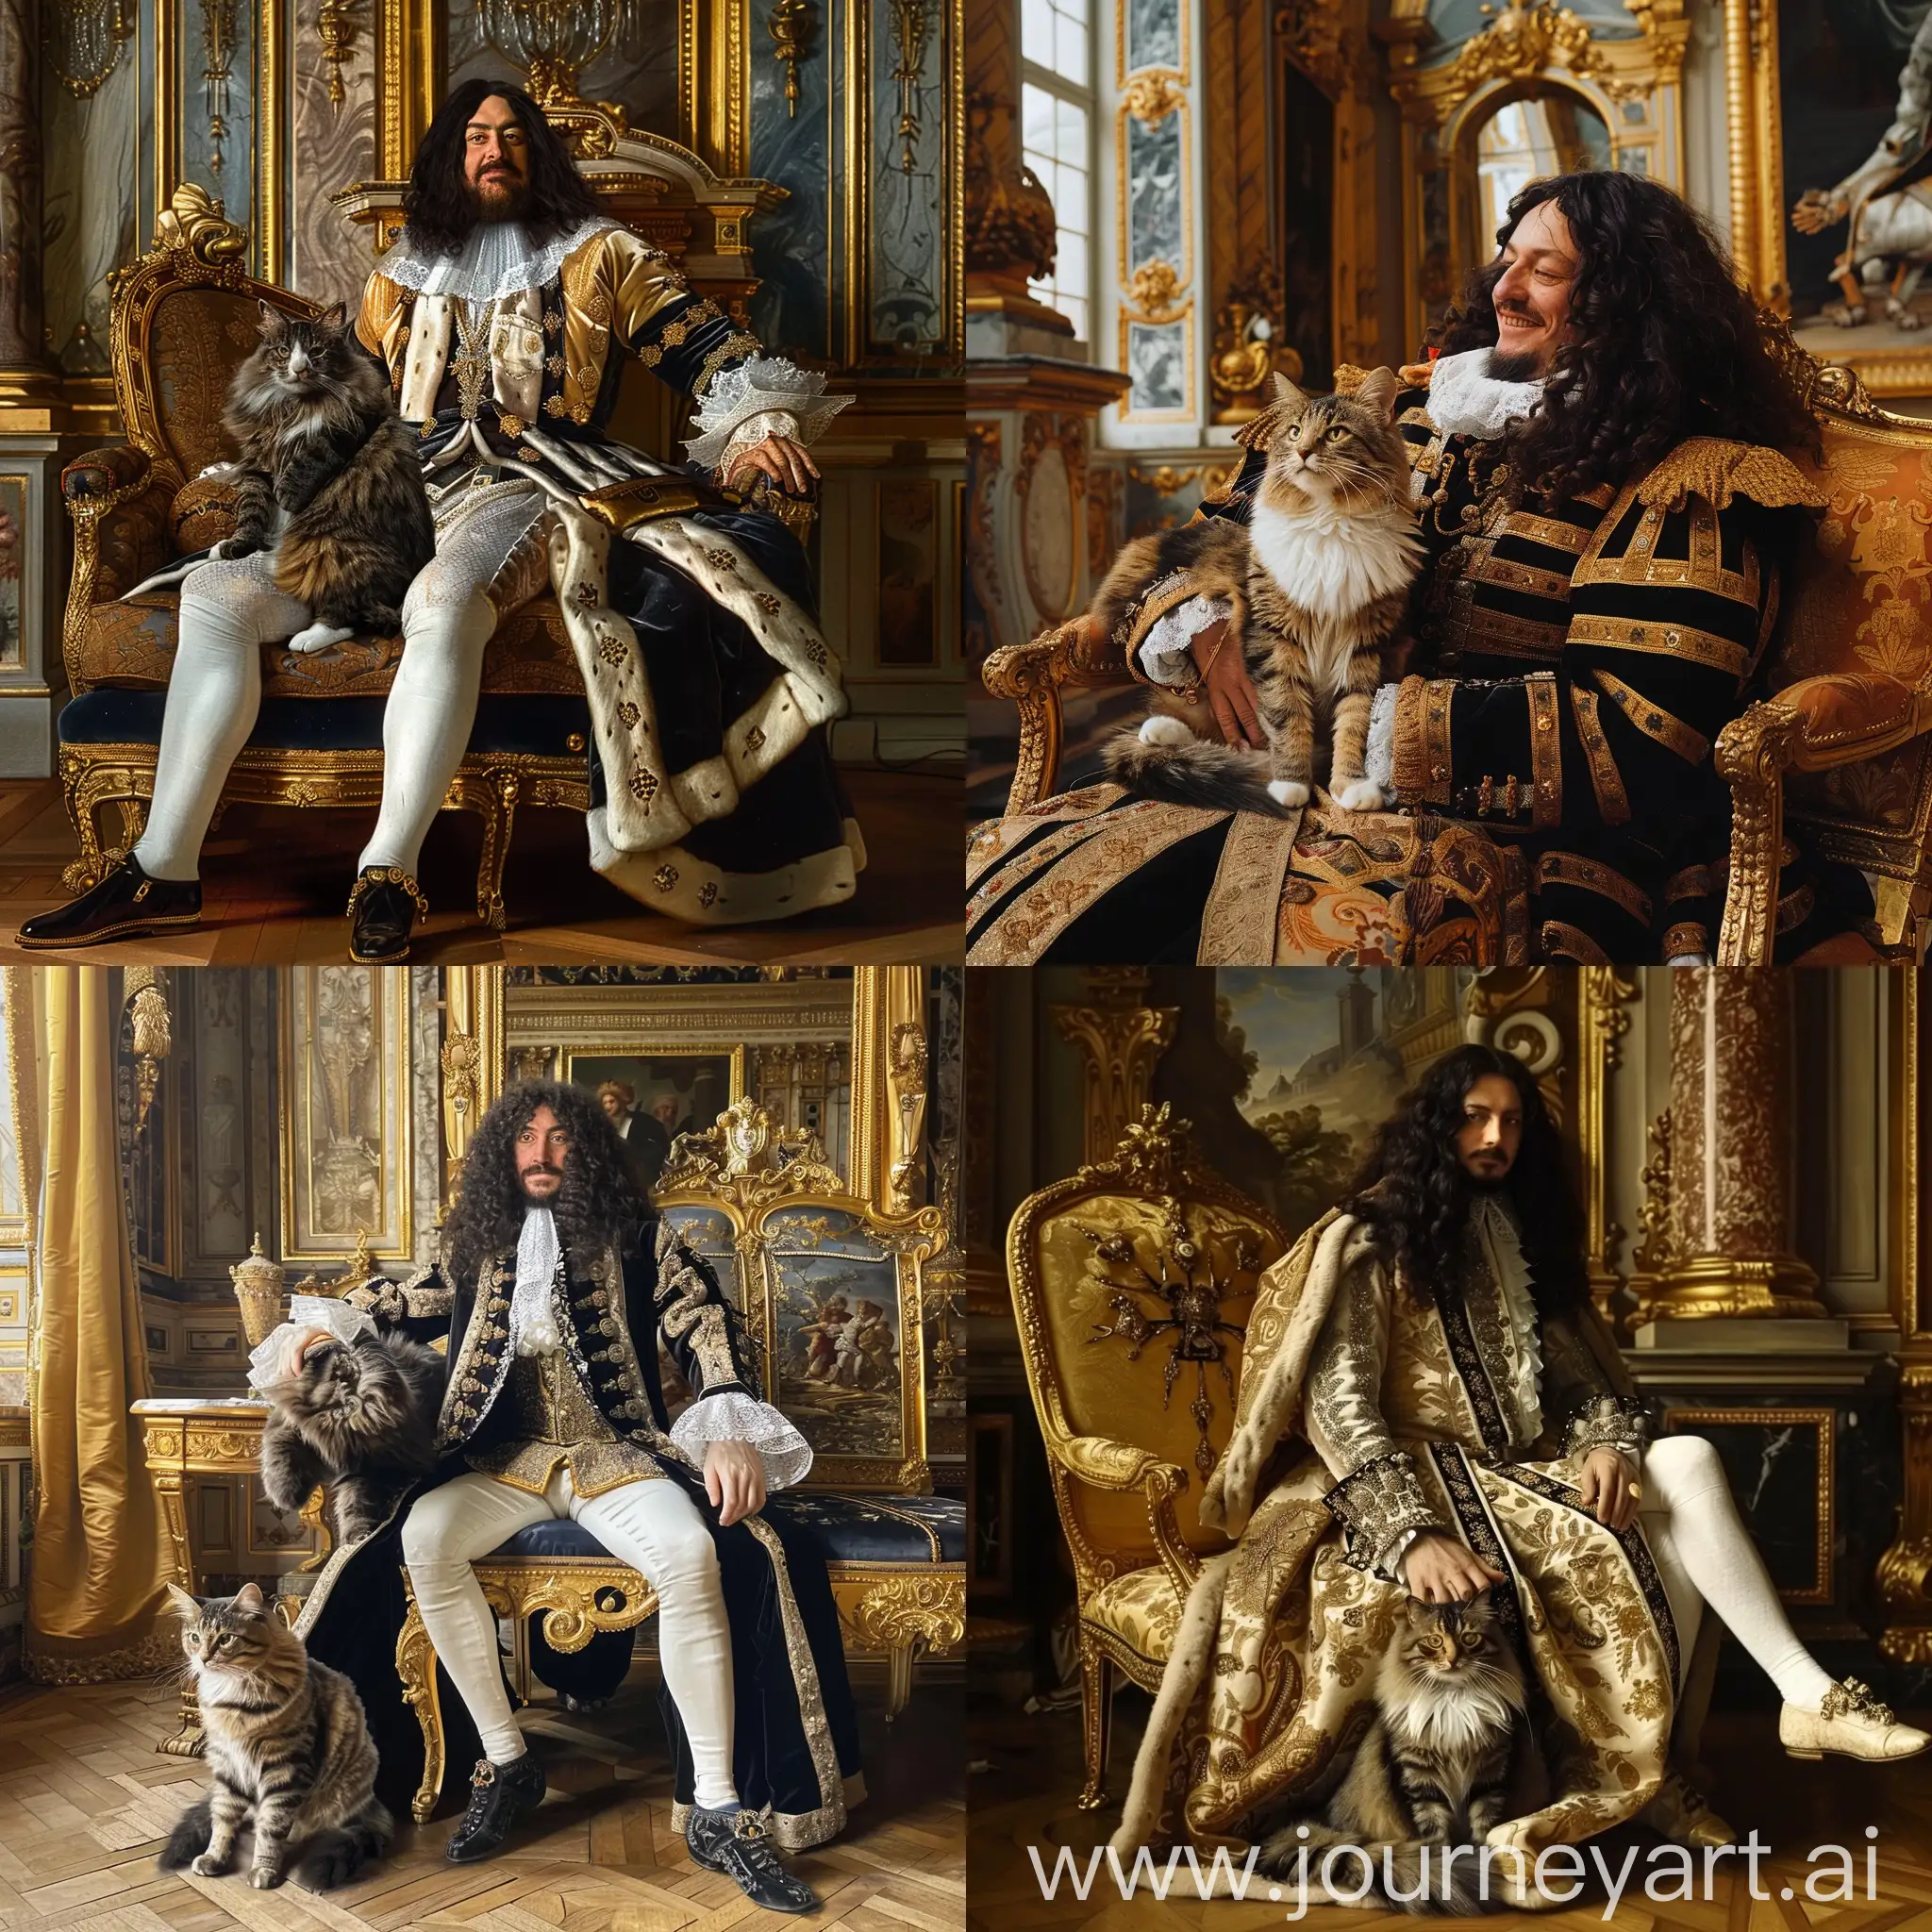 SulkhanSaba-Orbeliani-and-Louis-XIV-at-Decorated-Palace-of-Versailles-with-Cat